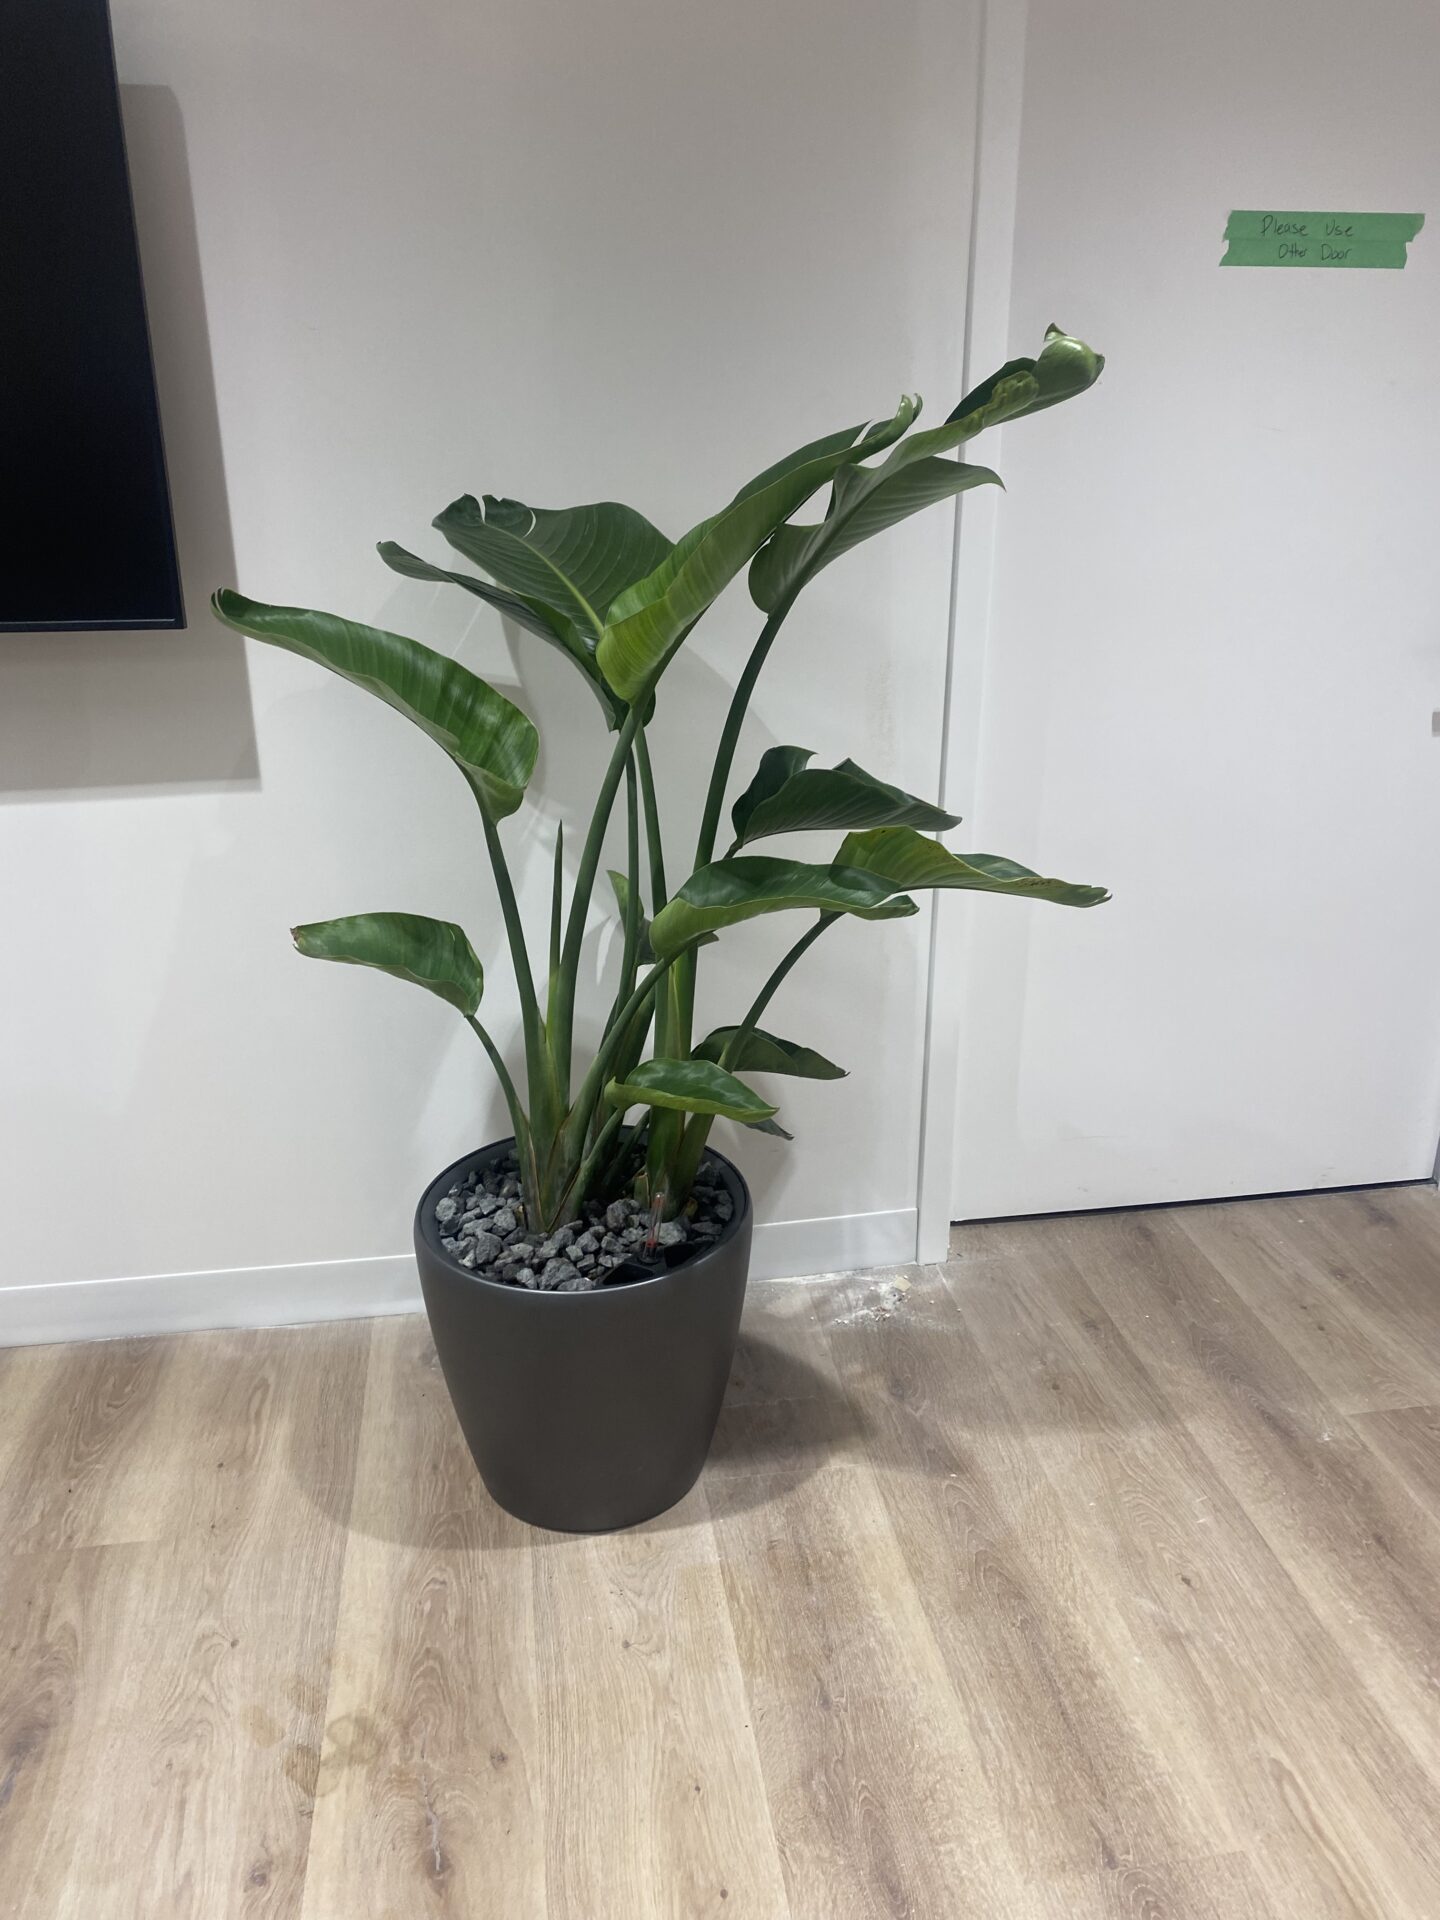 An indoor plant with large green leaves is potted in a dark gray container, set on wooden flooring near a white wall with signage.